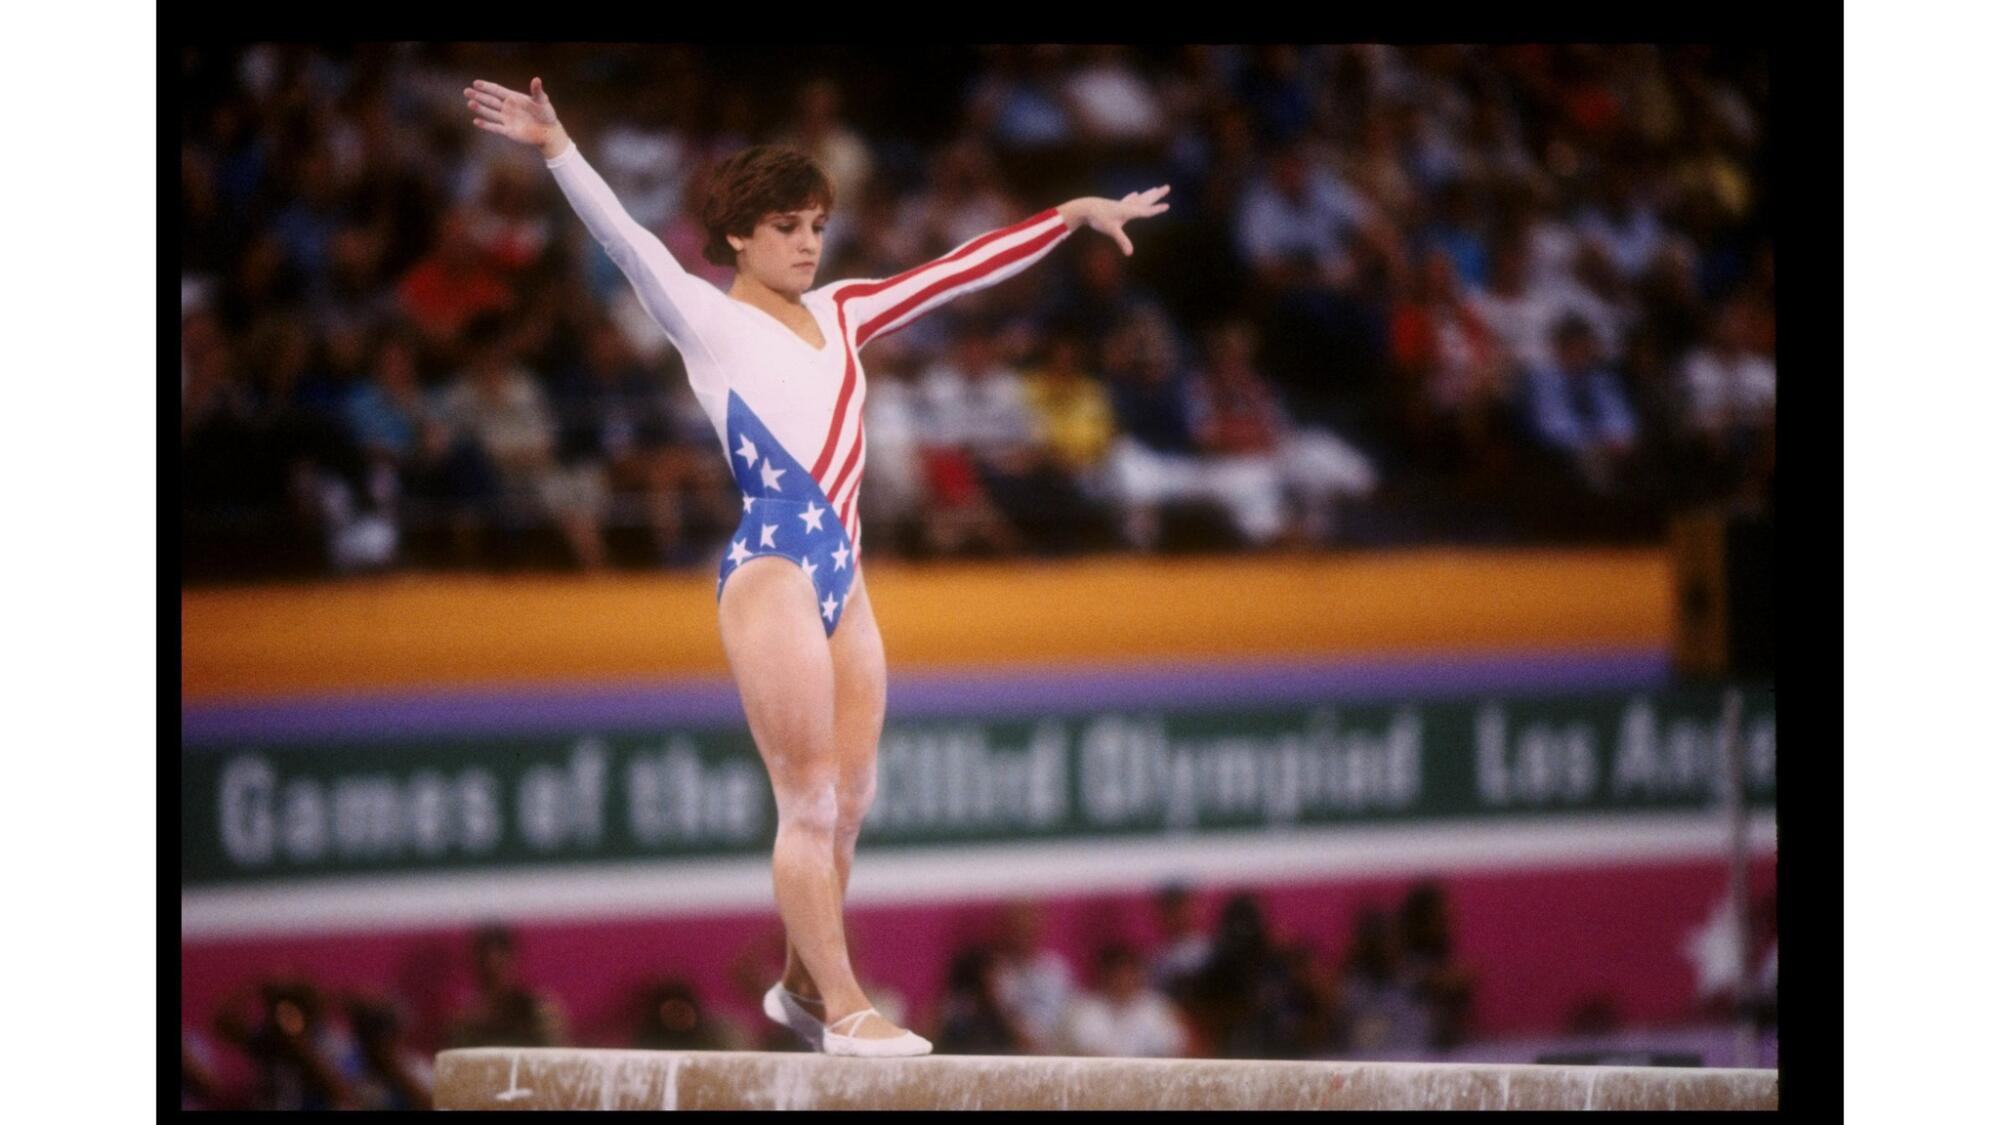 Mary Lou Retton competes on the balance beam during the 1984 Summer Olympics in Los Angeles.